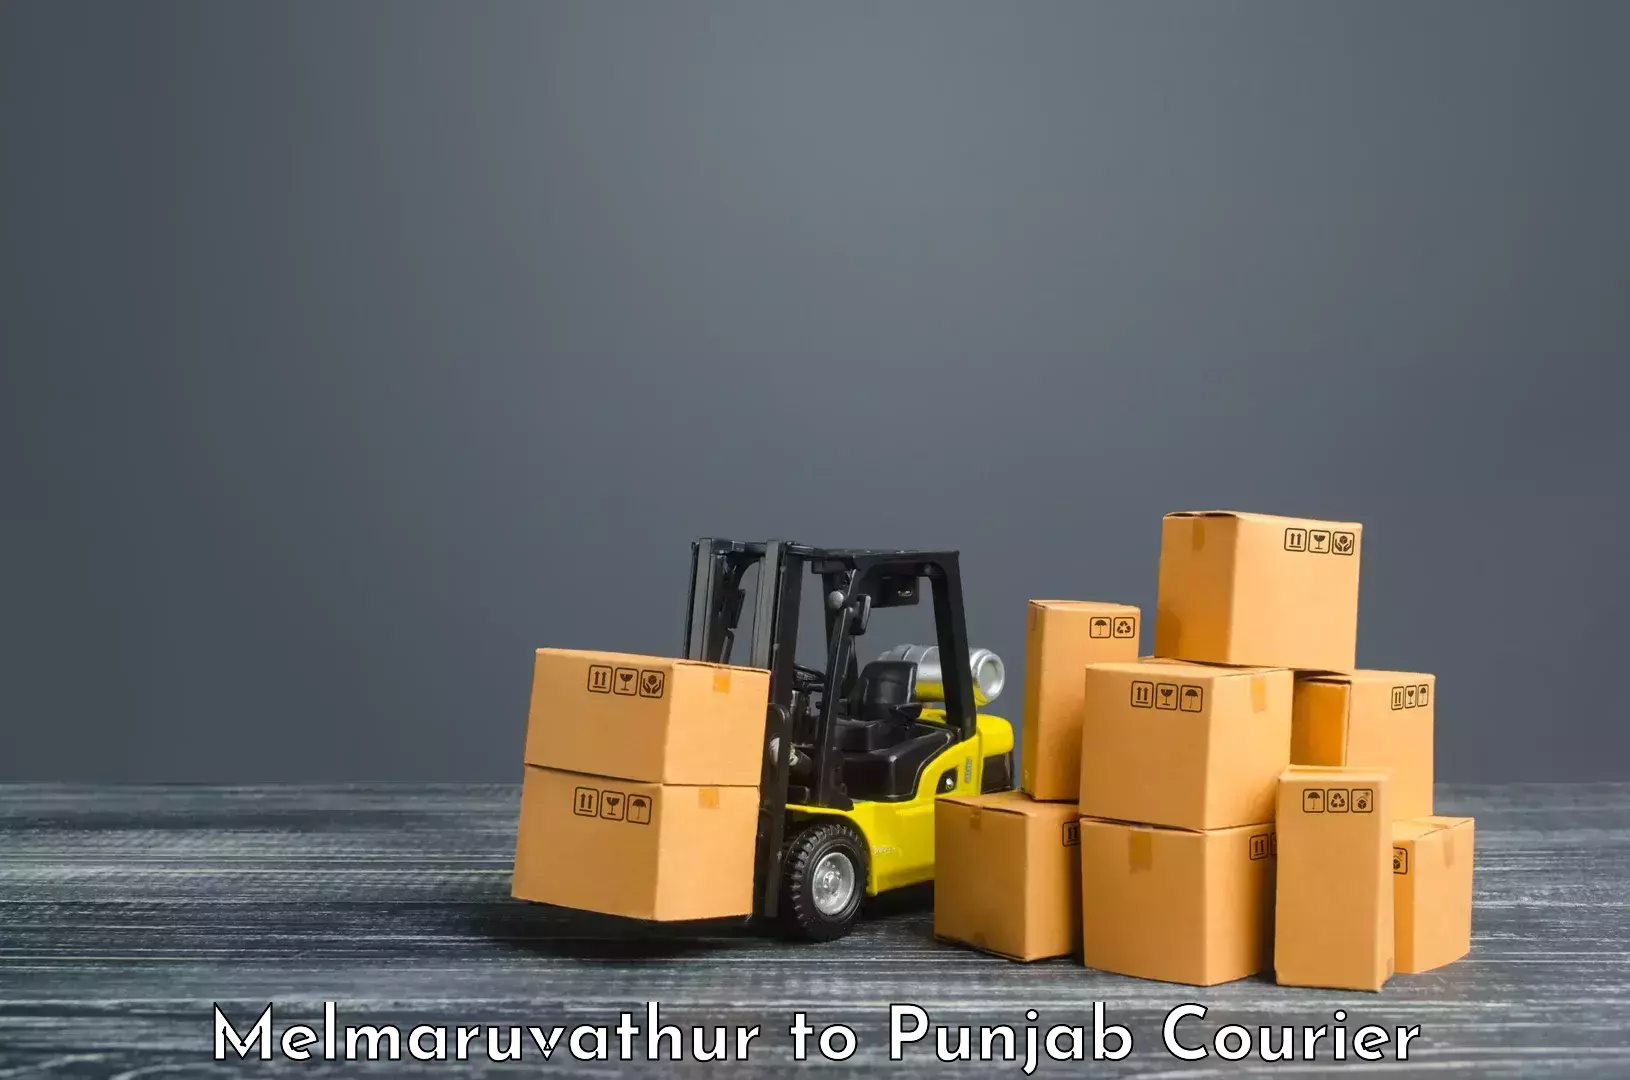 Seamless shipping service Melmaruvathur to Thapar Institute of Engineering and Technology Patiala